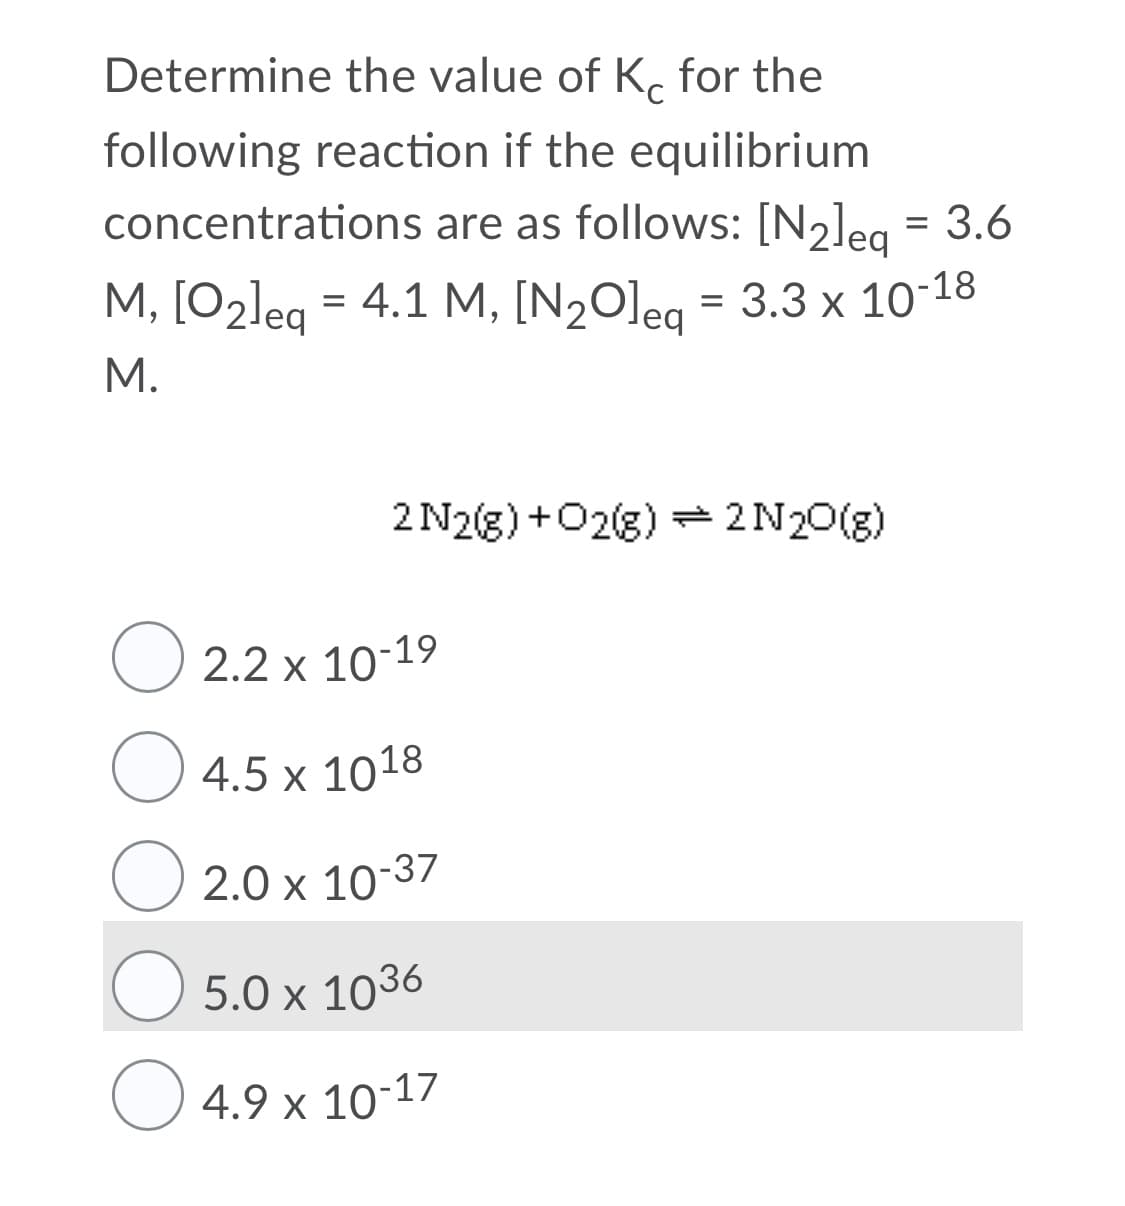 Determine the value of K. for the
following reaction if the equilibrium
concentrations are as follows: [N2]eg = 3.6
%3D
M, [O2leg = 4.1 M, [N2O]eg = 3.3 x 10-18
leq
M.
2 N2(g) +O2g) = 2N20(g)
O 2.2 x 10-19
4.5 x 1018
2.0 x 10-37
5.0 x 1036
4.9 x 10-17
